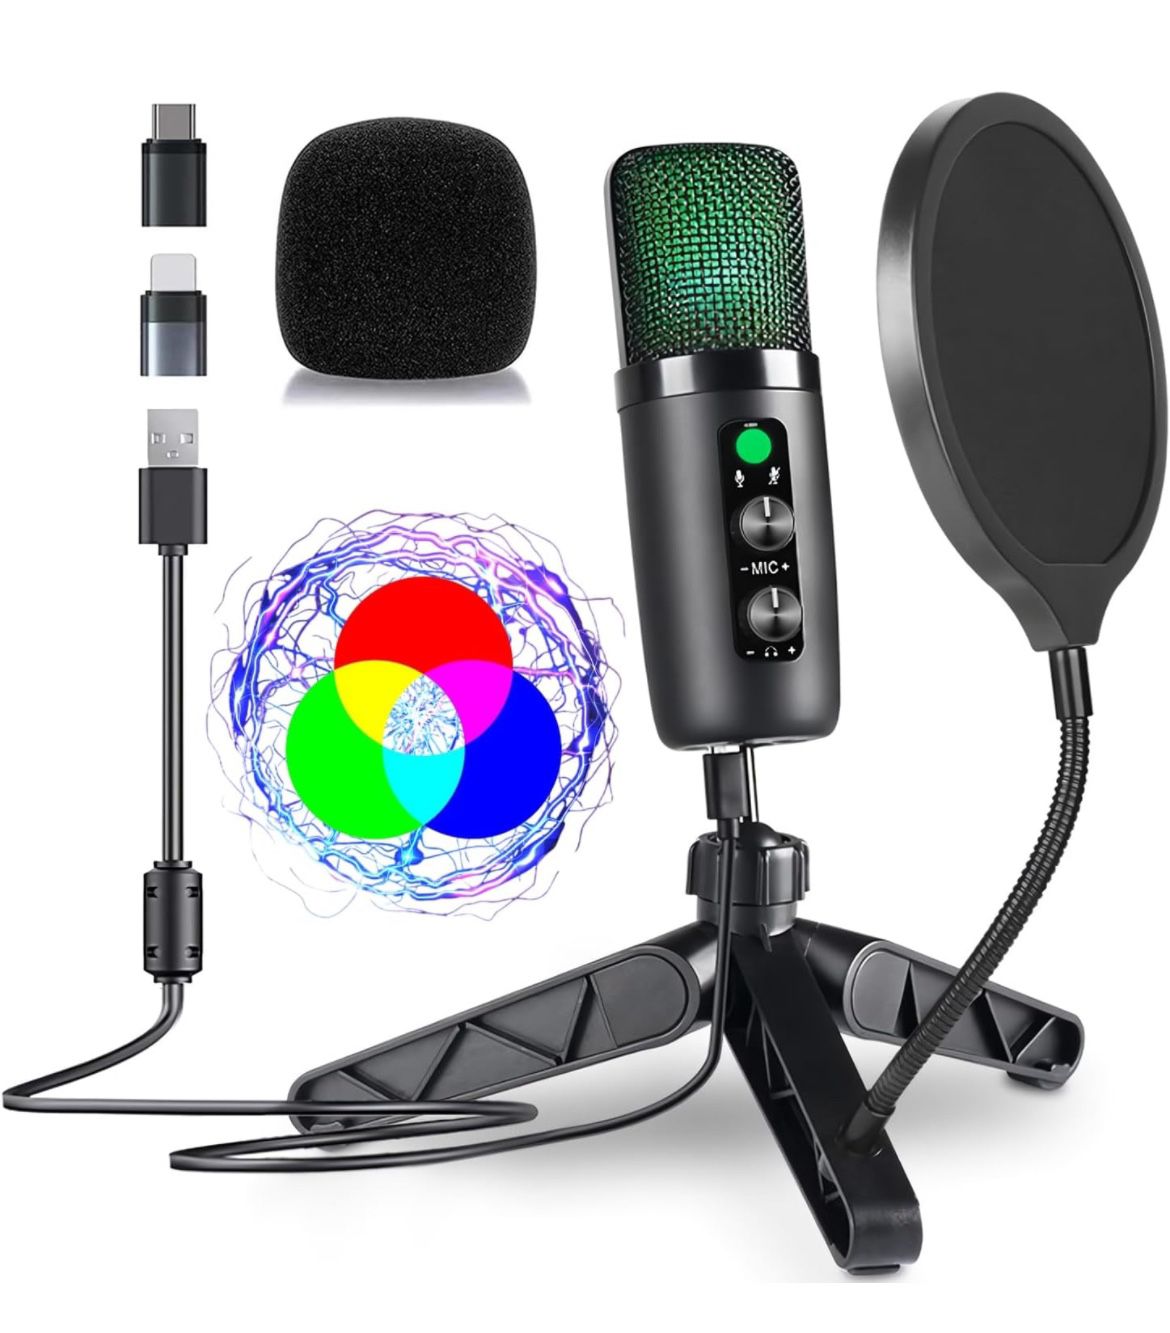 Mini USB Condenser Microphone for Podcast Recording, Gaming, PC, Streaming, Computer Microphone for Desktop, External Microphone for Laptop, Compatibl